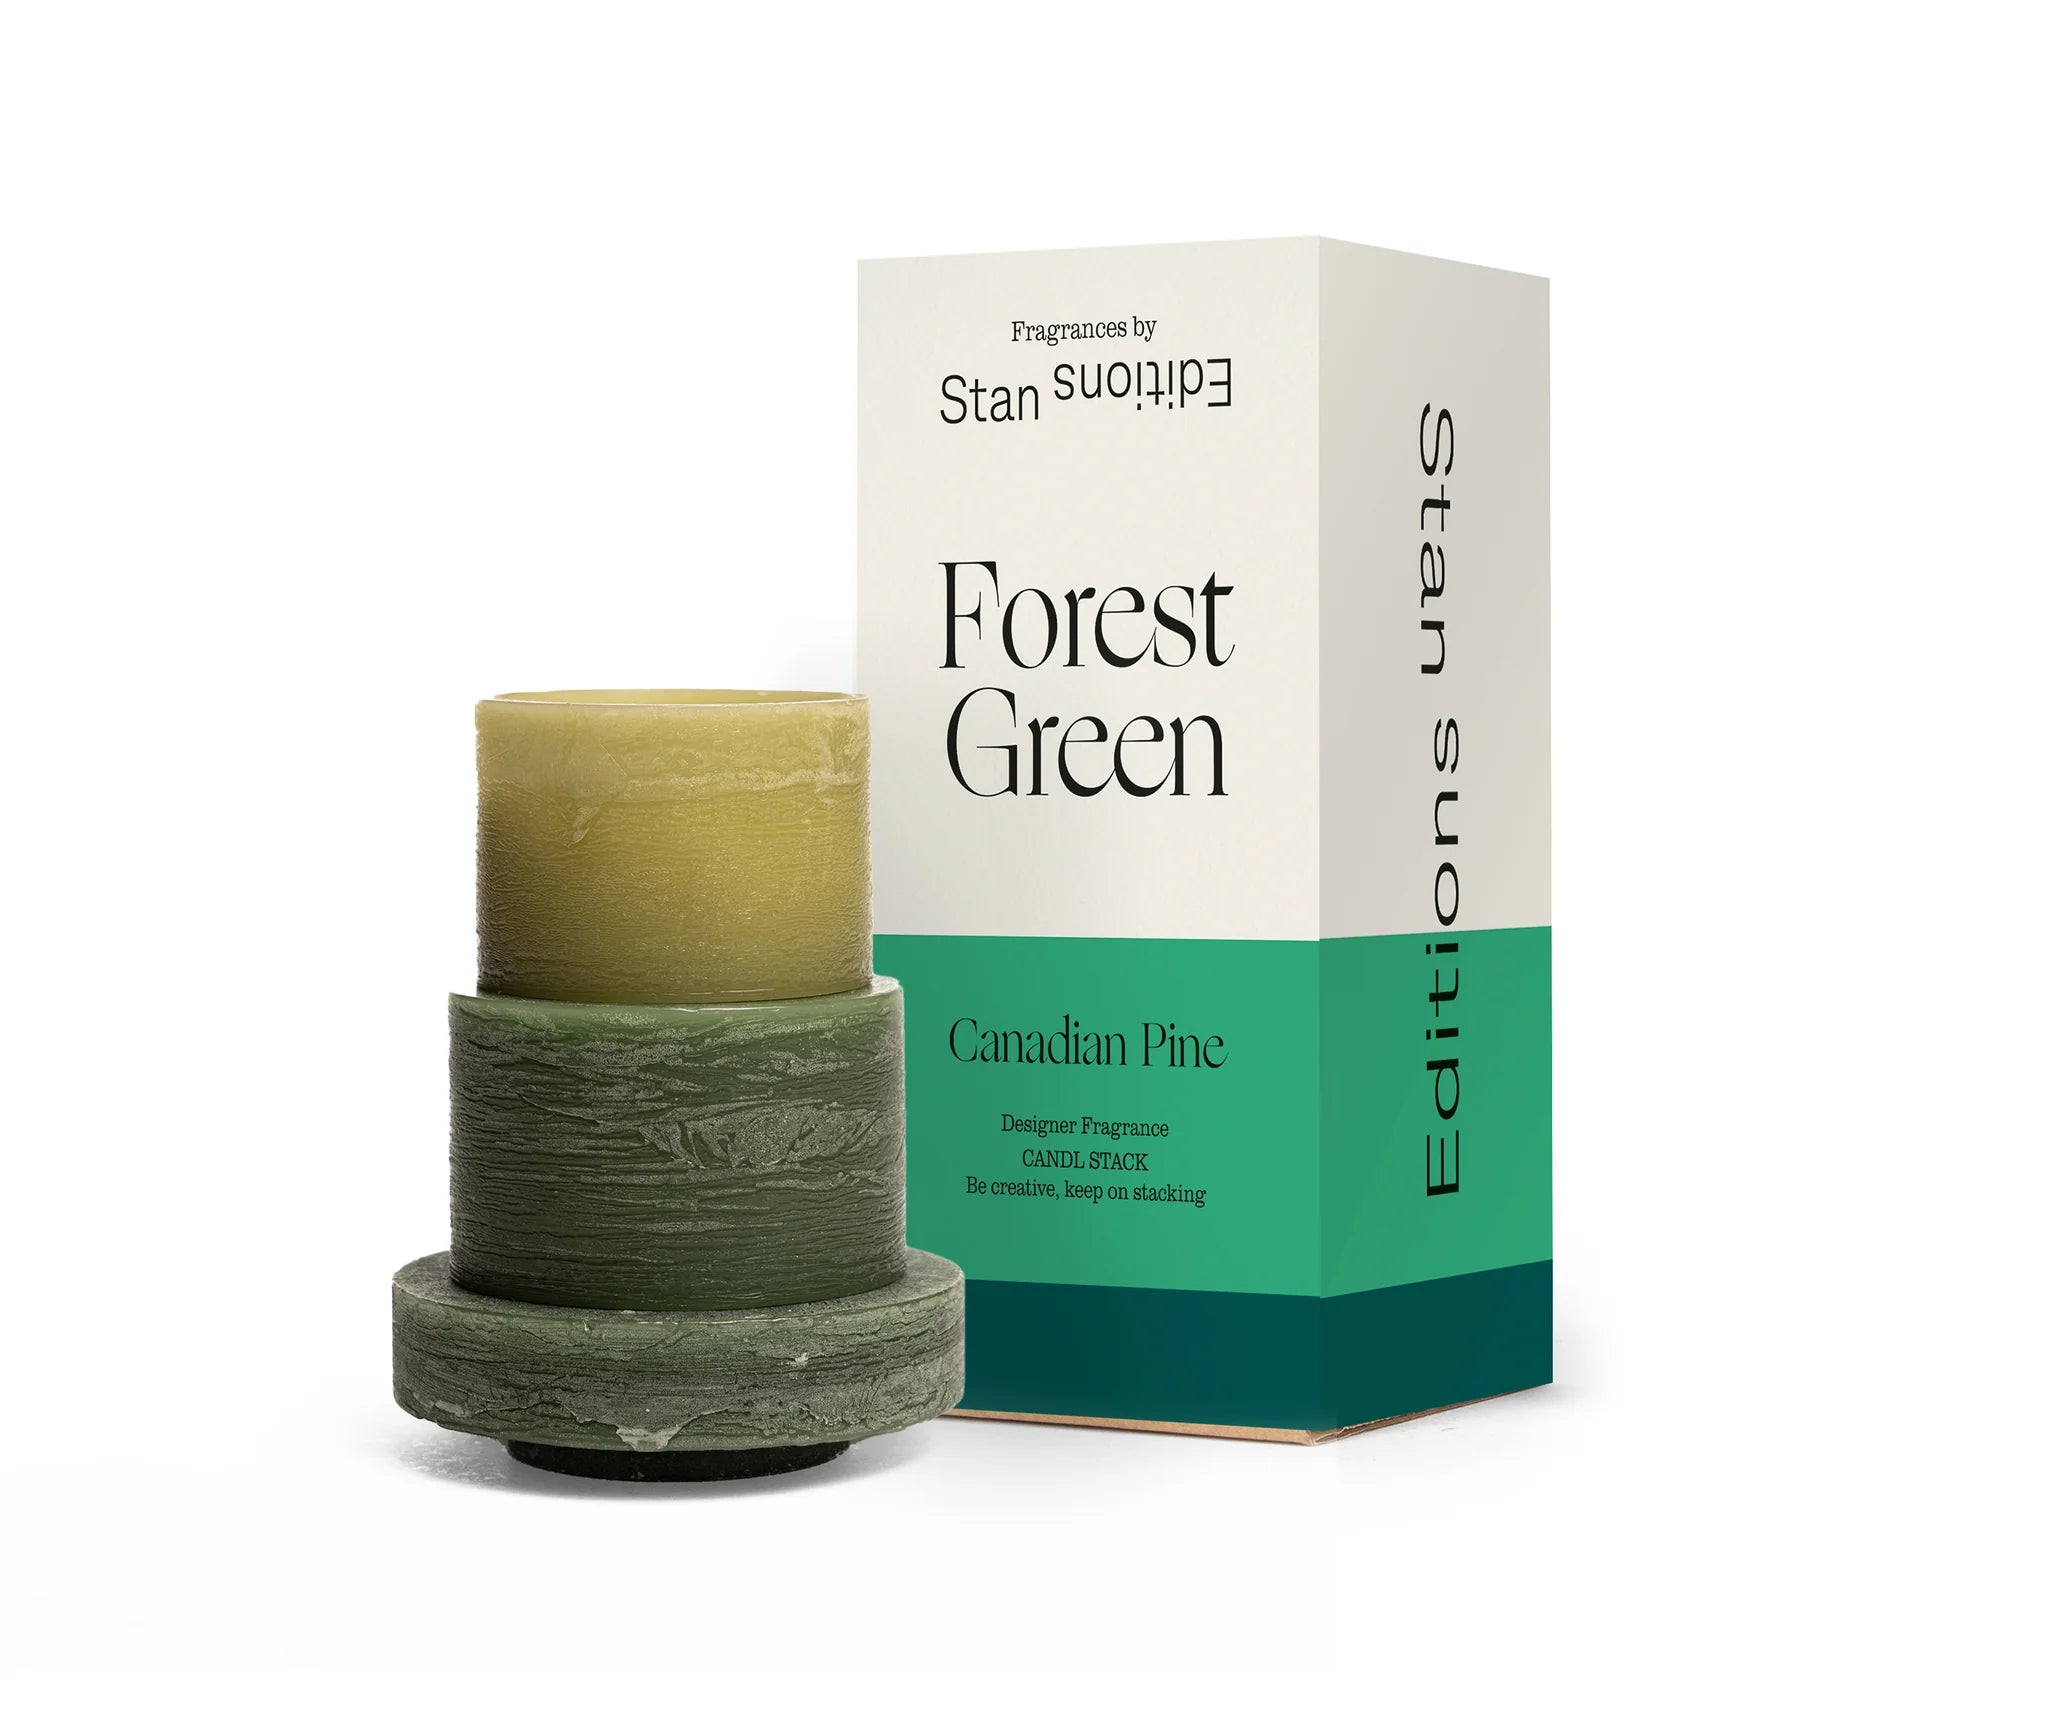 Forest Green Fragrances - Stan Editions